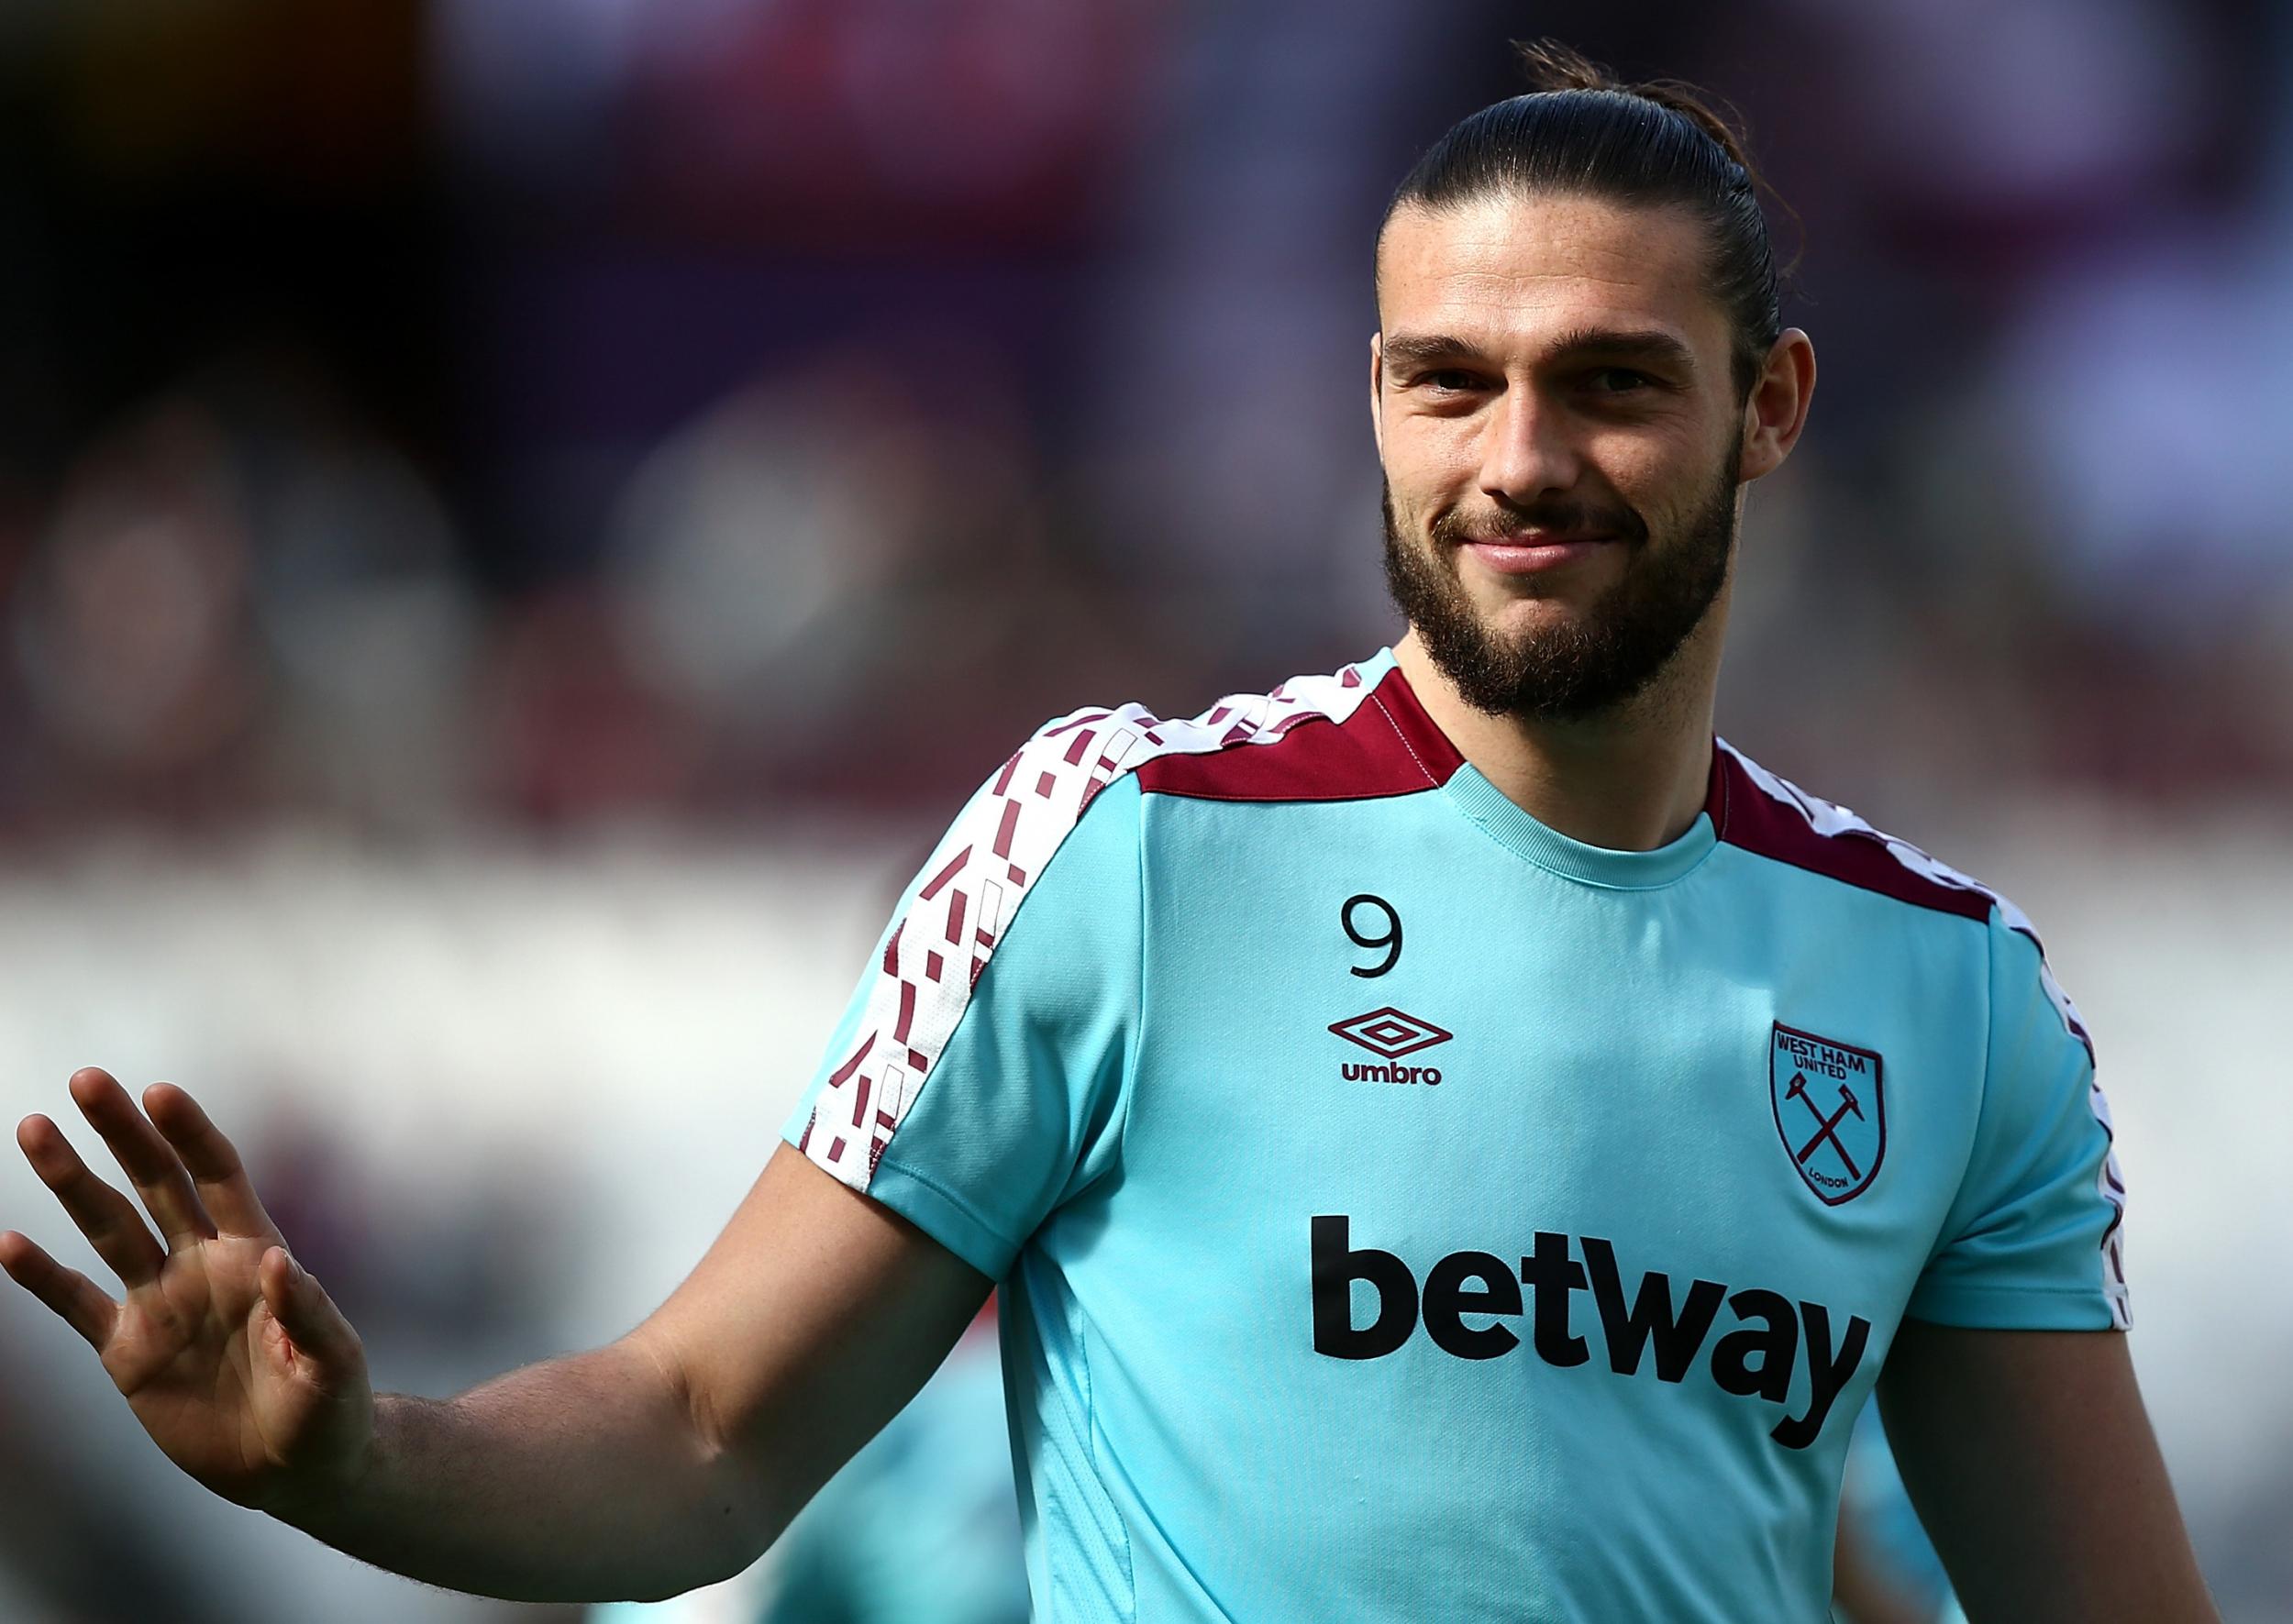 Will Carroll slot back into the first-team when he returns from injury?